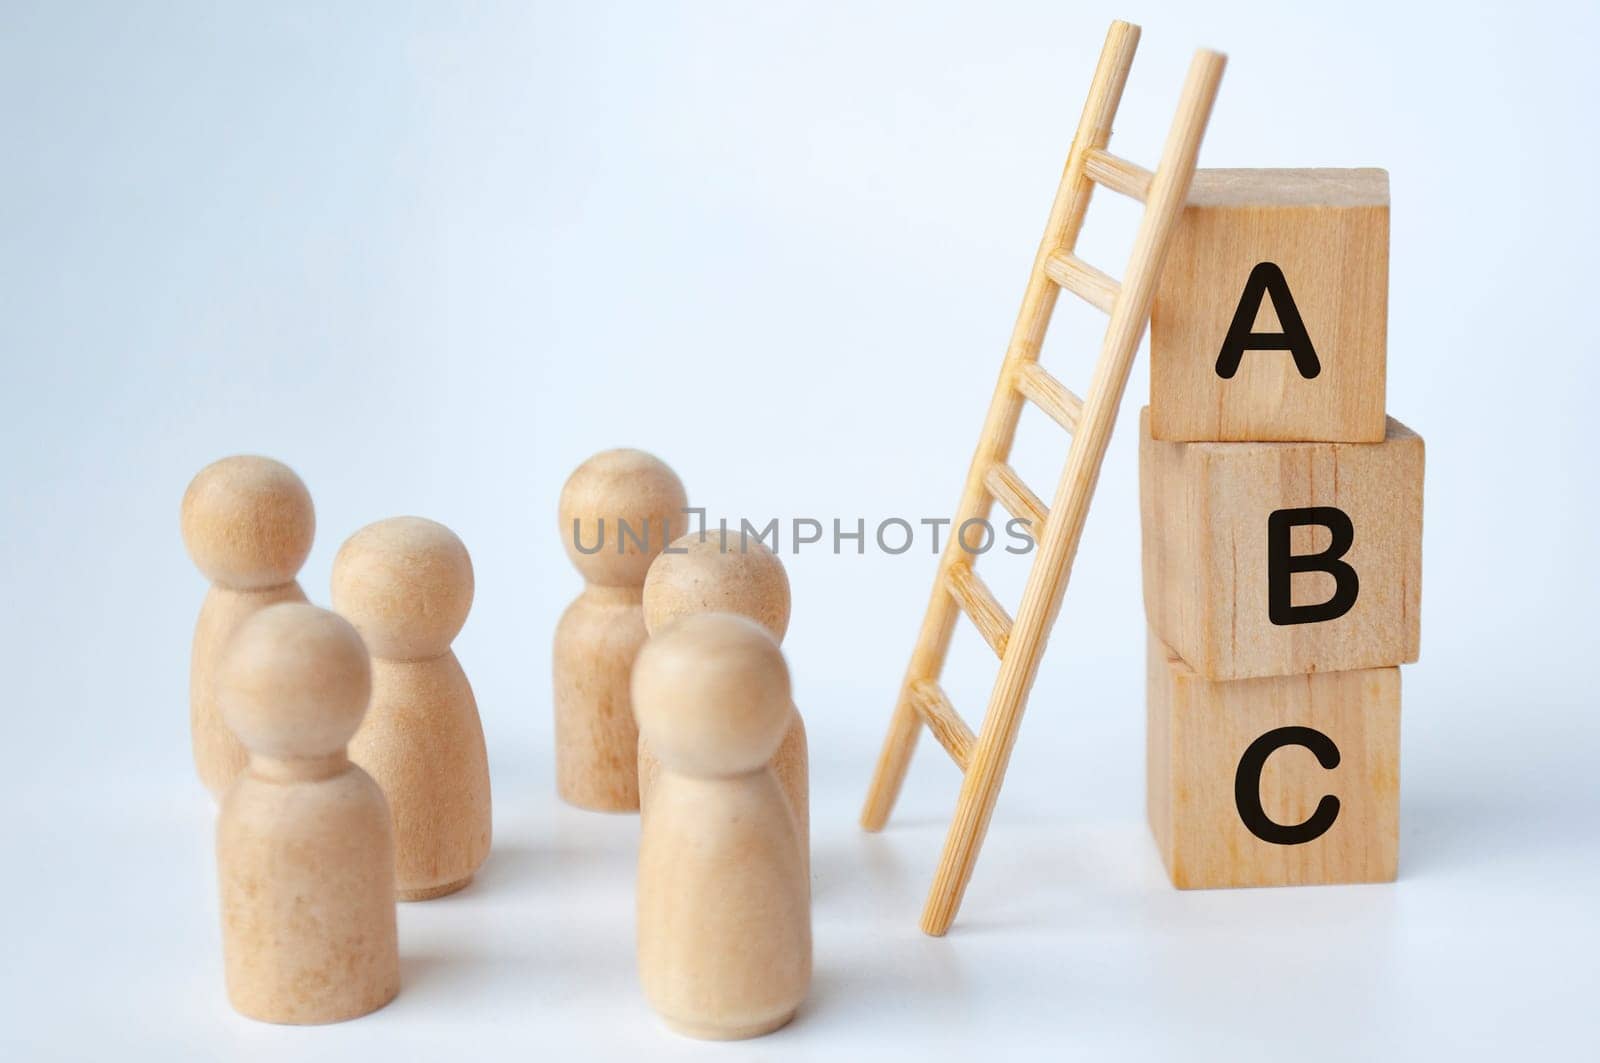 ABC text on wooden cubes with ladder and doll figures on white background. Knowledge concept.